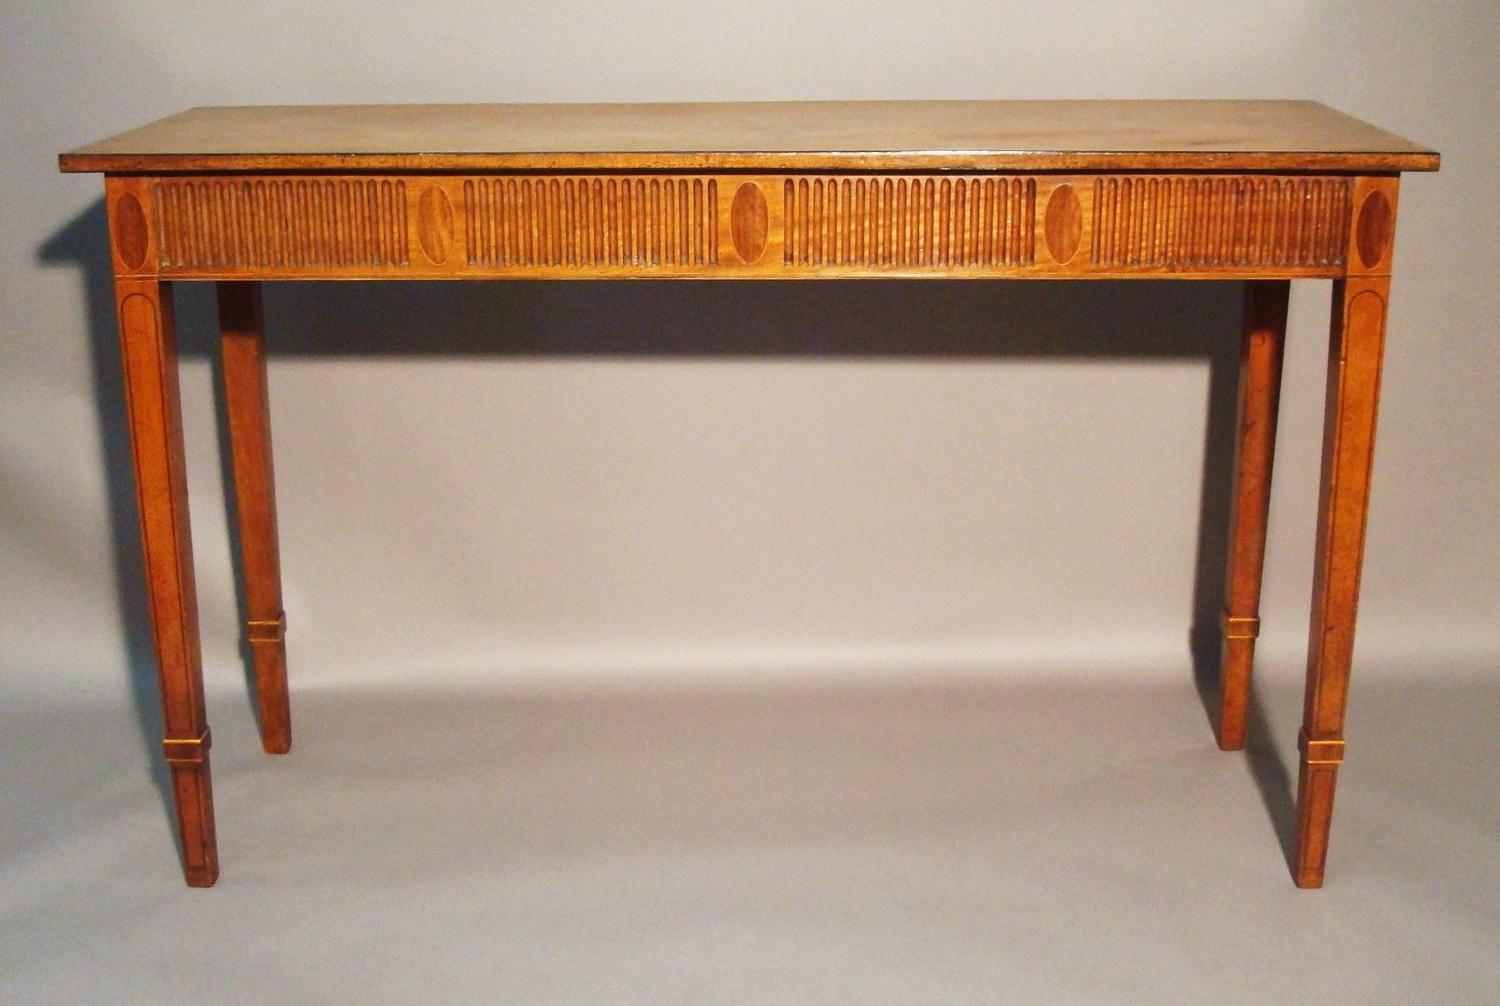 George III mahogany neo-classical console table